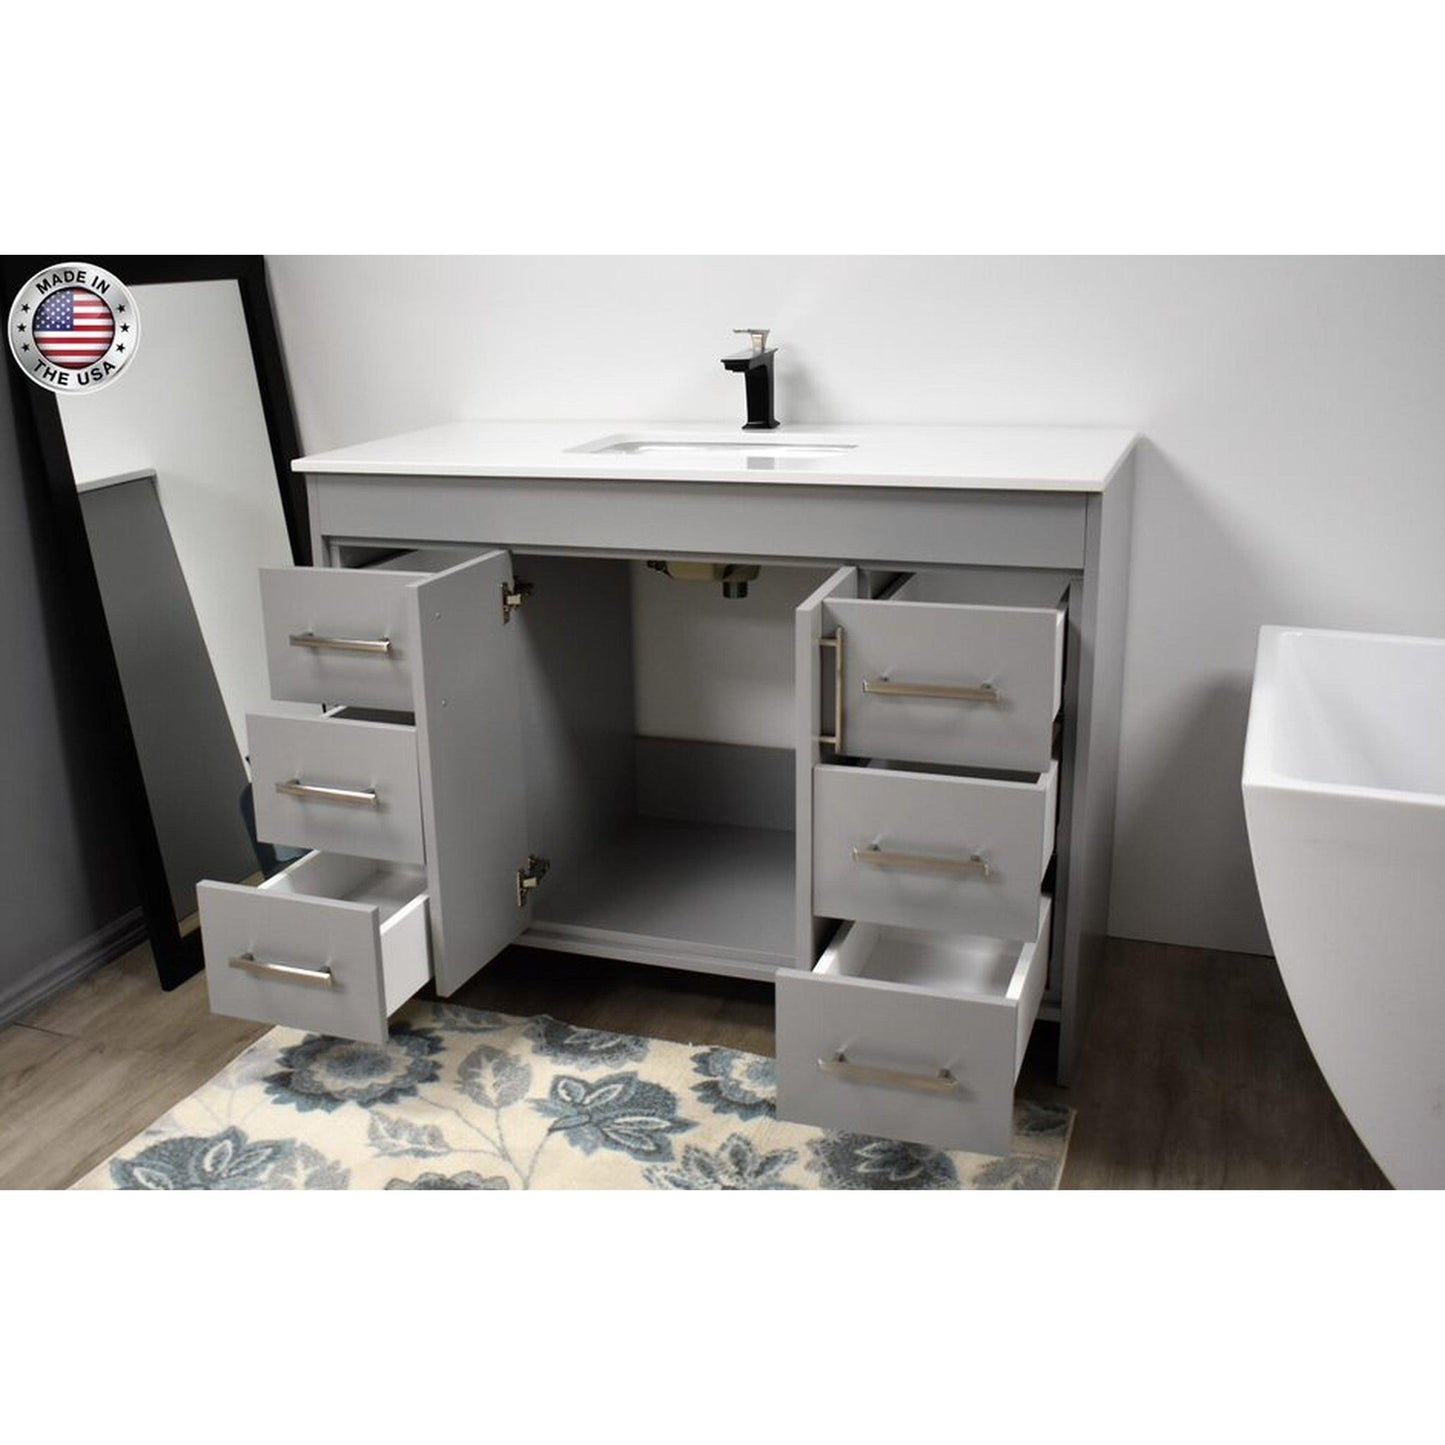 Volpa USA Capri 48" x 22" Gray Freestanding Modern Bathroom Vanity With Preinstalled Undermount Sink And White Microstone Top With Brushed Nickel Edge Handles